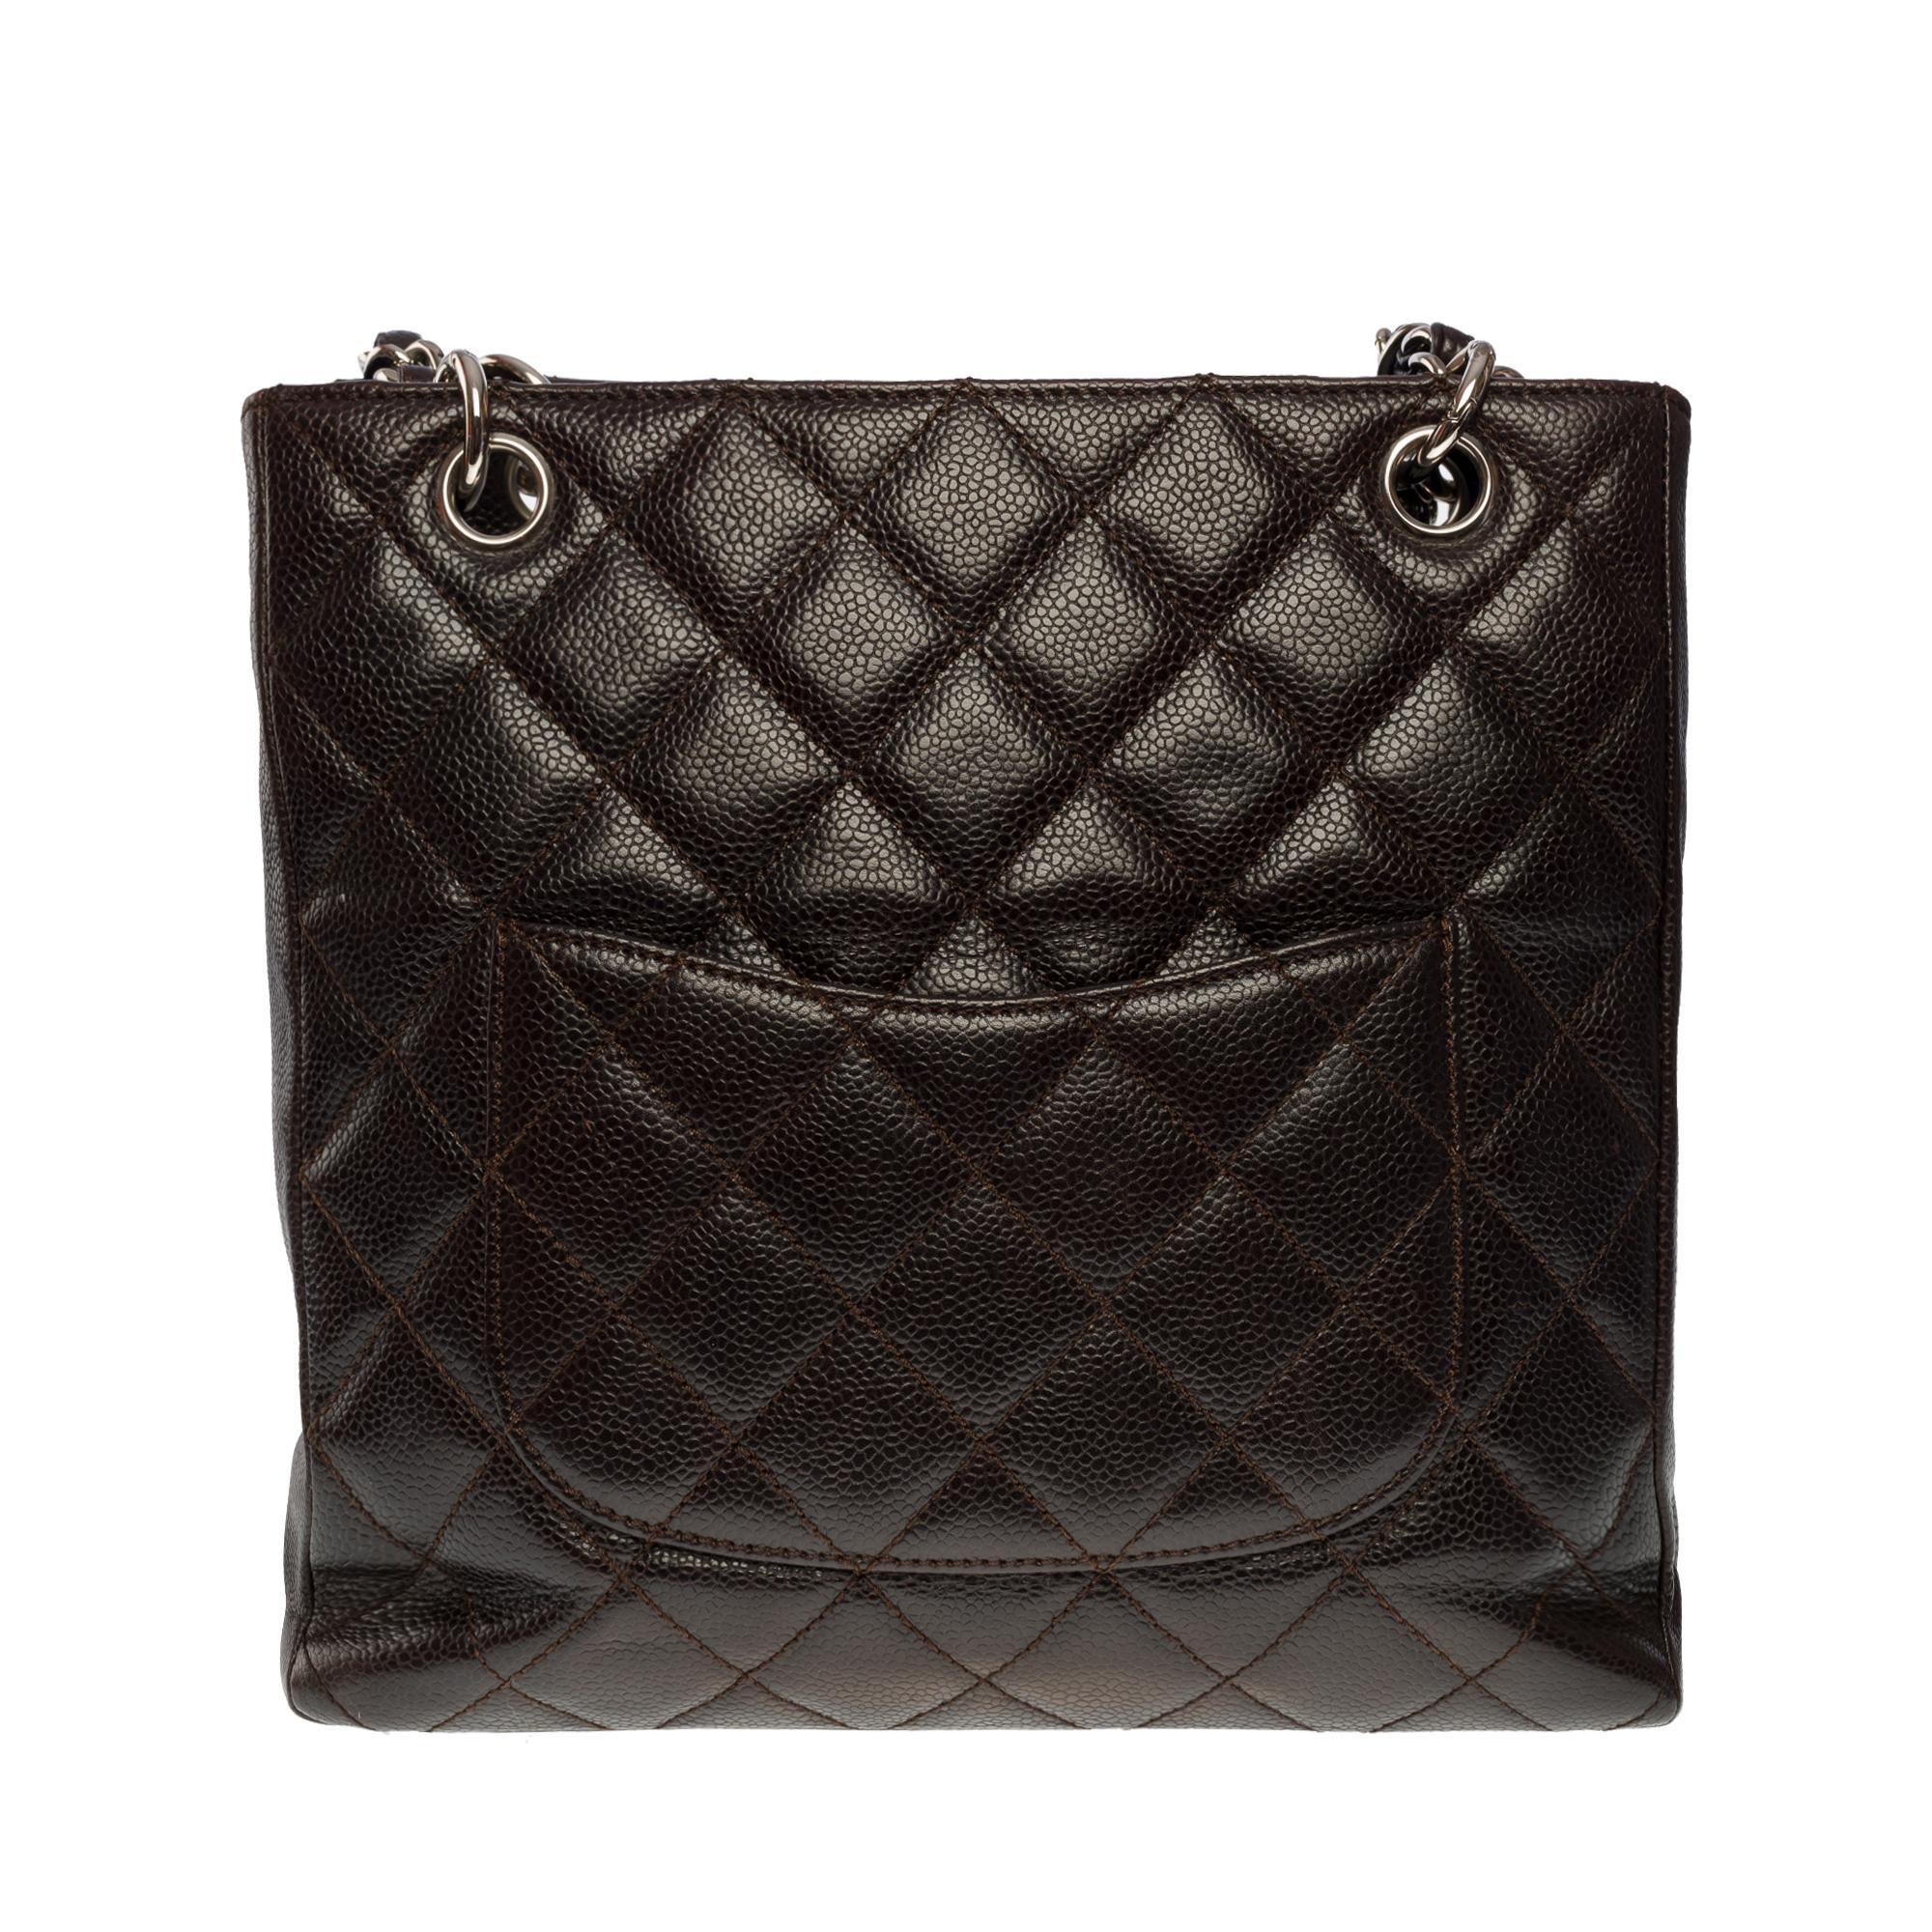 Chanel Pst Tote - 2 For Sale on 1stDibs